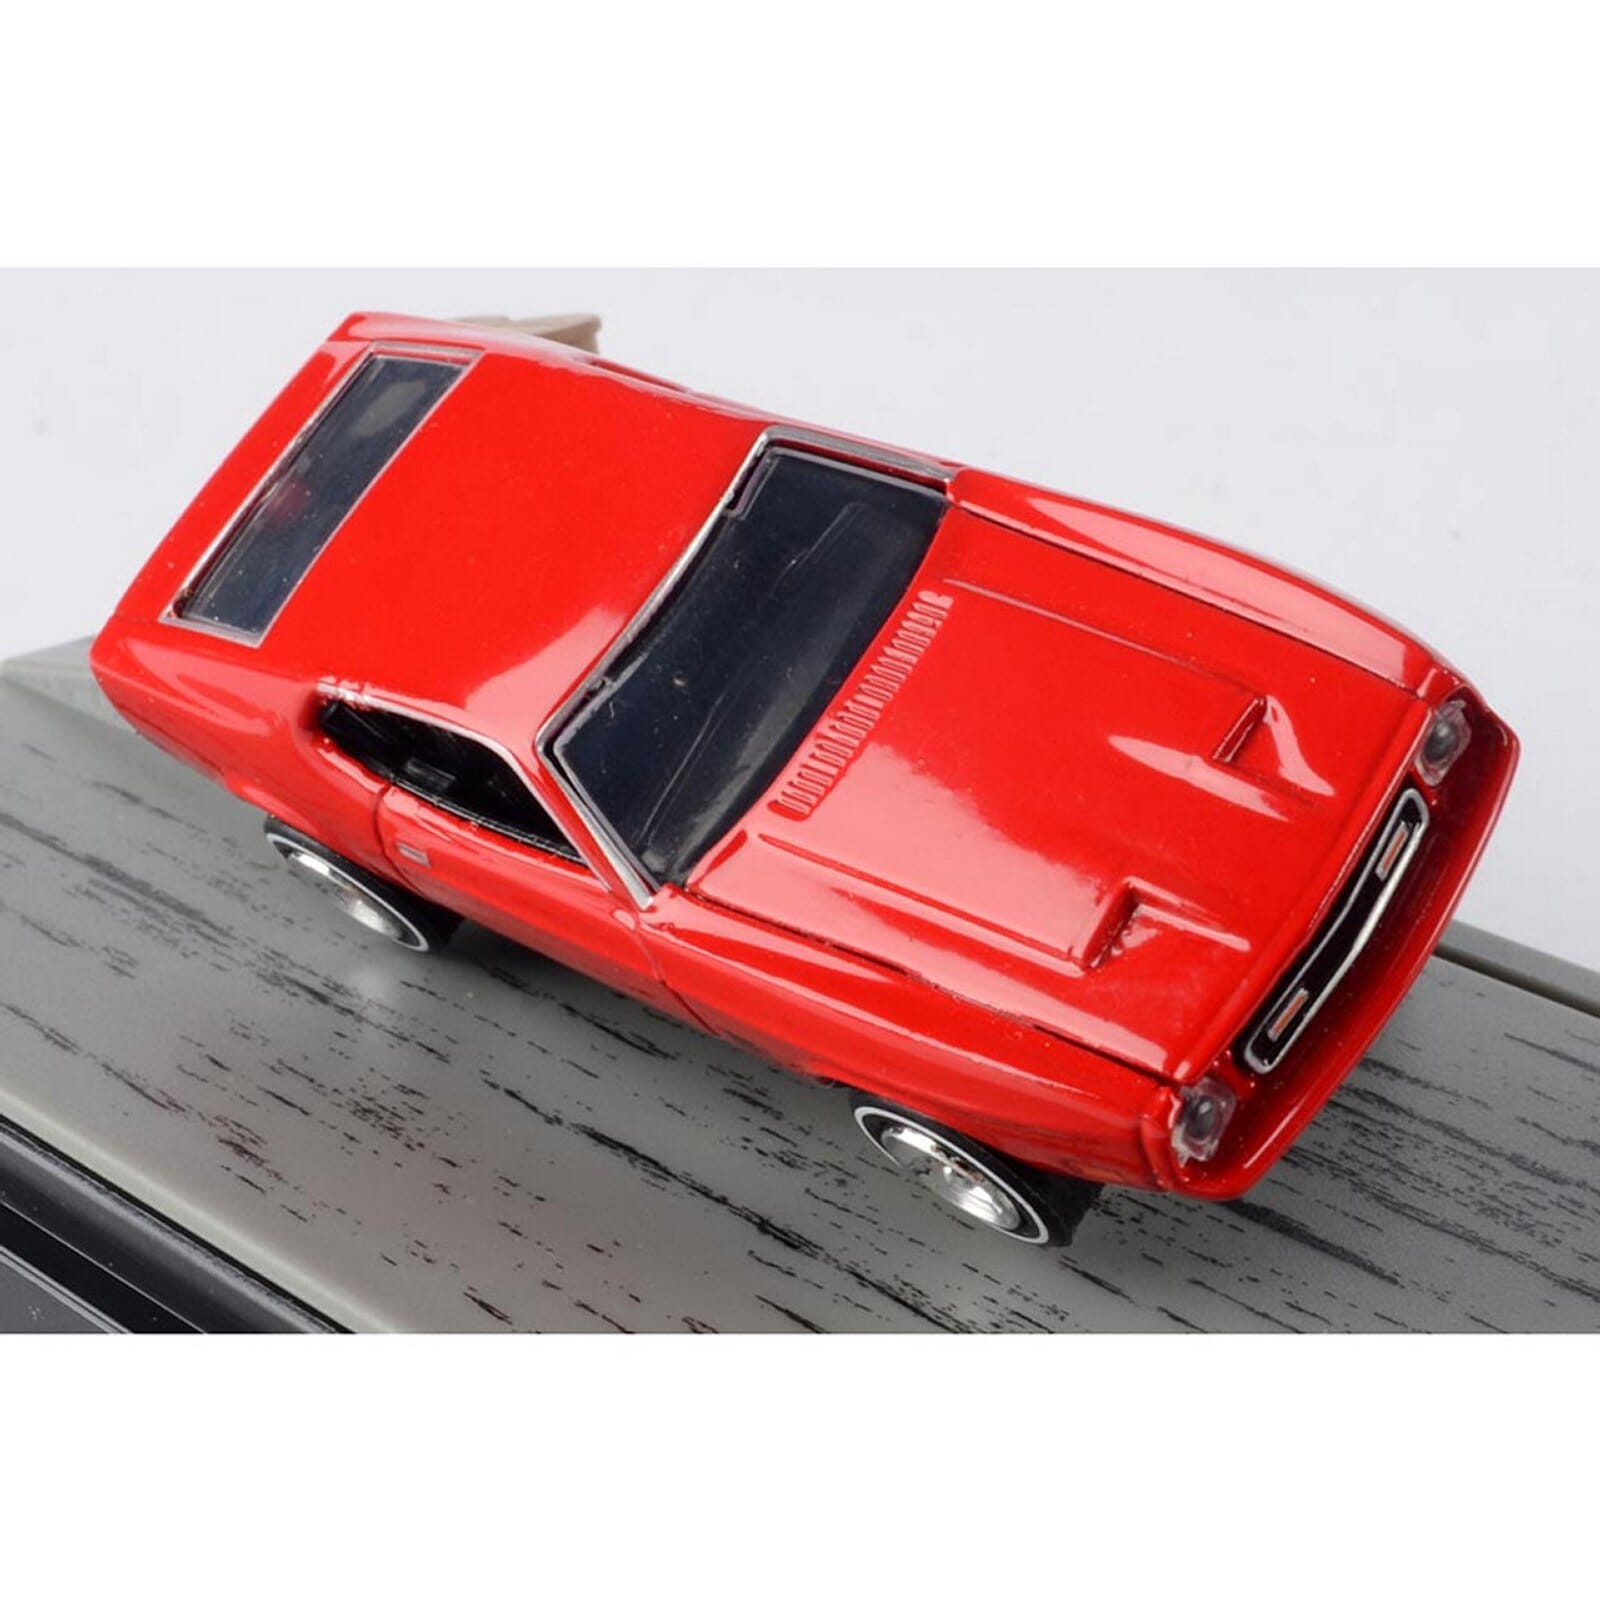 Ford Mustang Mach 1 From James Bond Diamonds Are Forever in Red